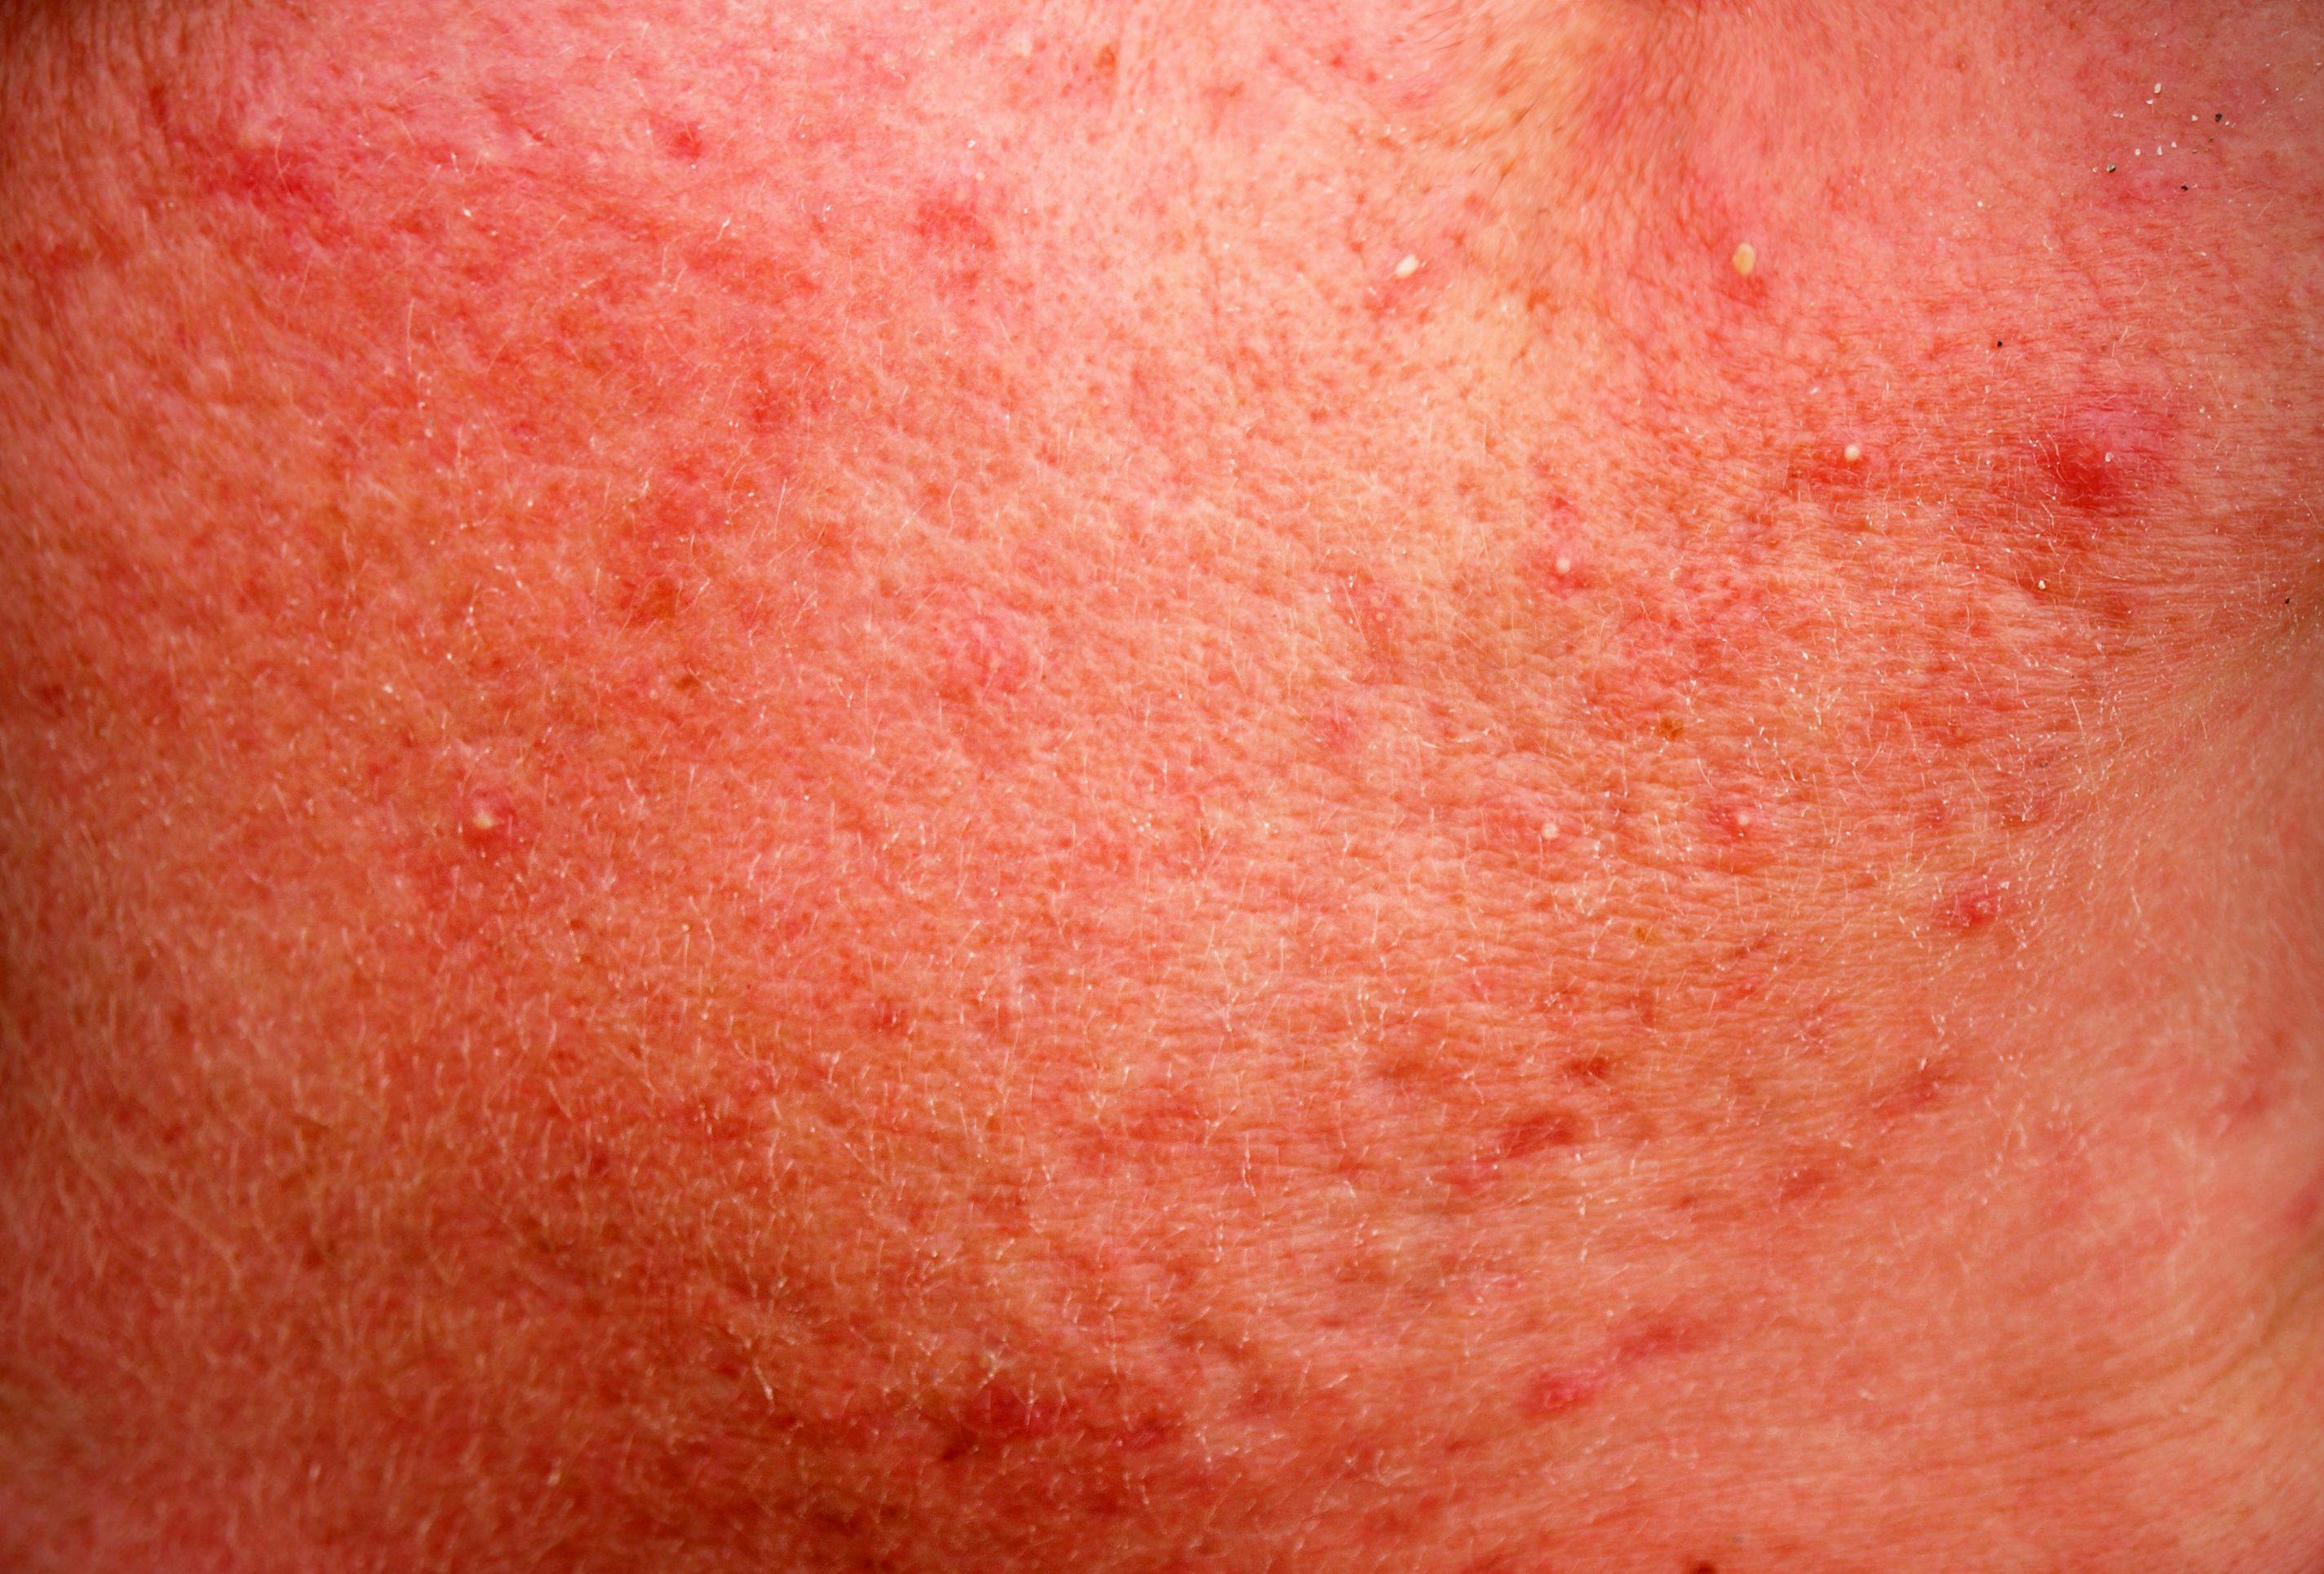 Age influences choice of rosacea therapies